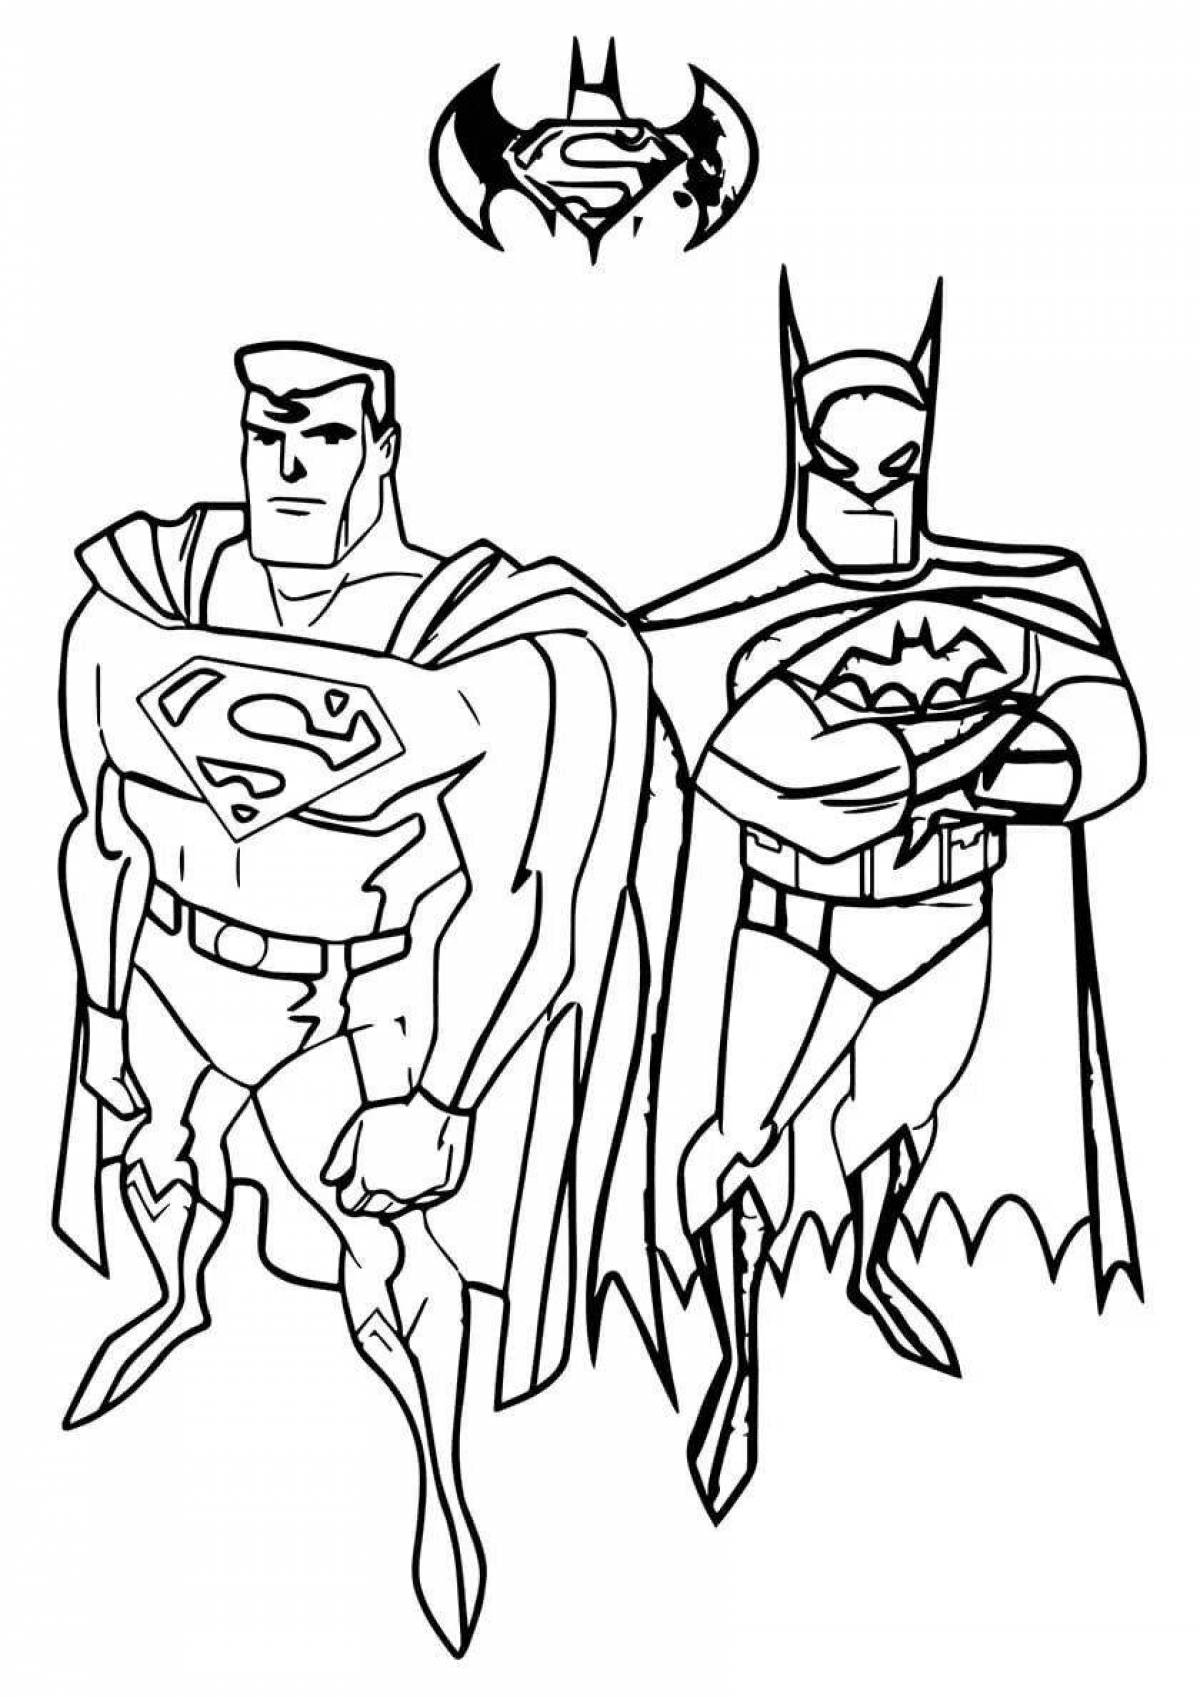 Fun superhero coloring book for 4-5 year olds